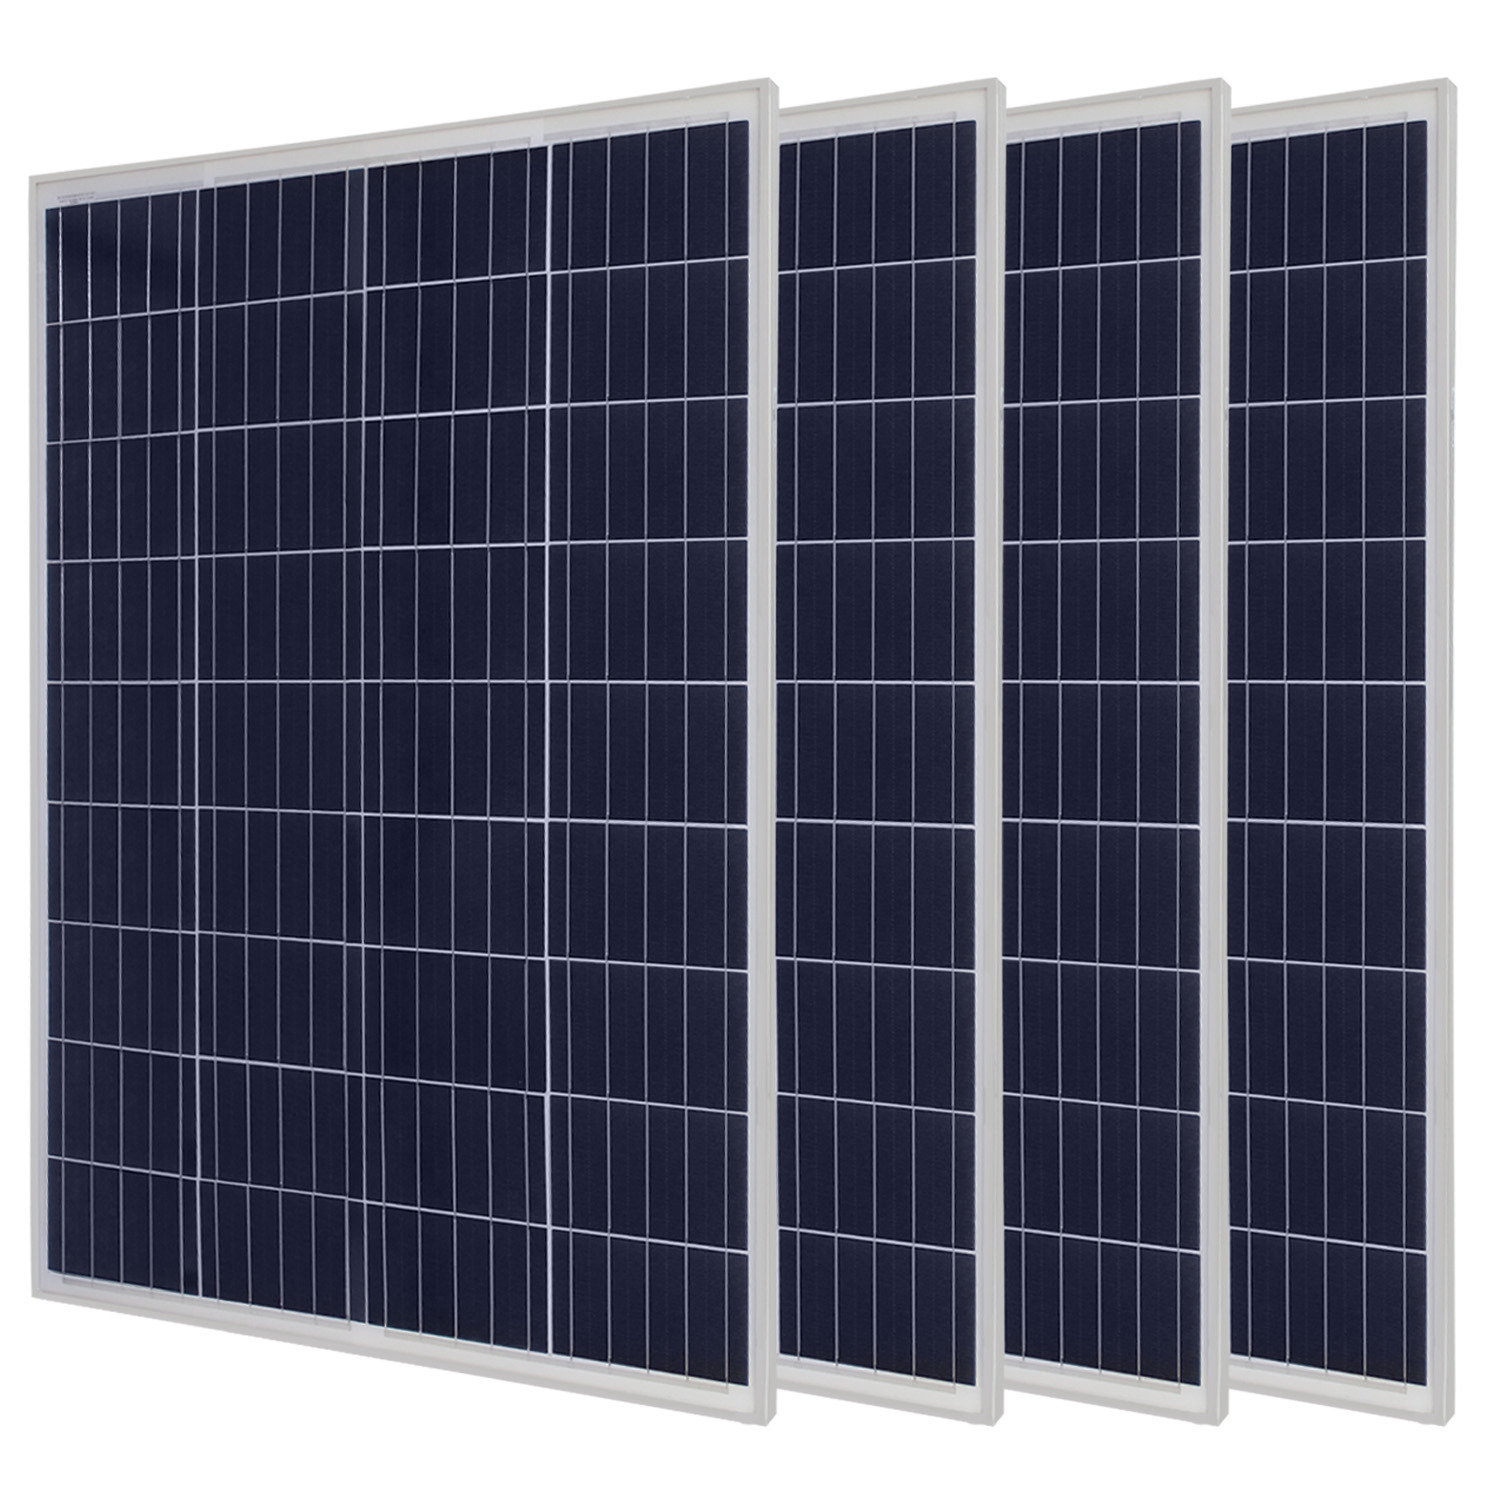 100W 12V poly Solar panel RV Camping Boat Dock Battery - 4 Pack